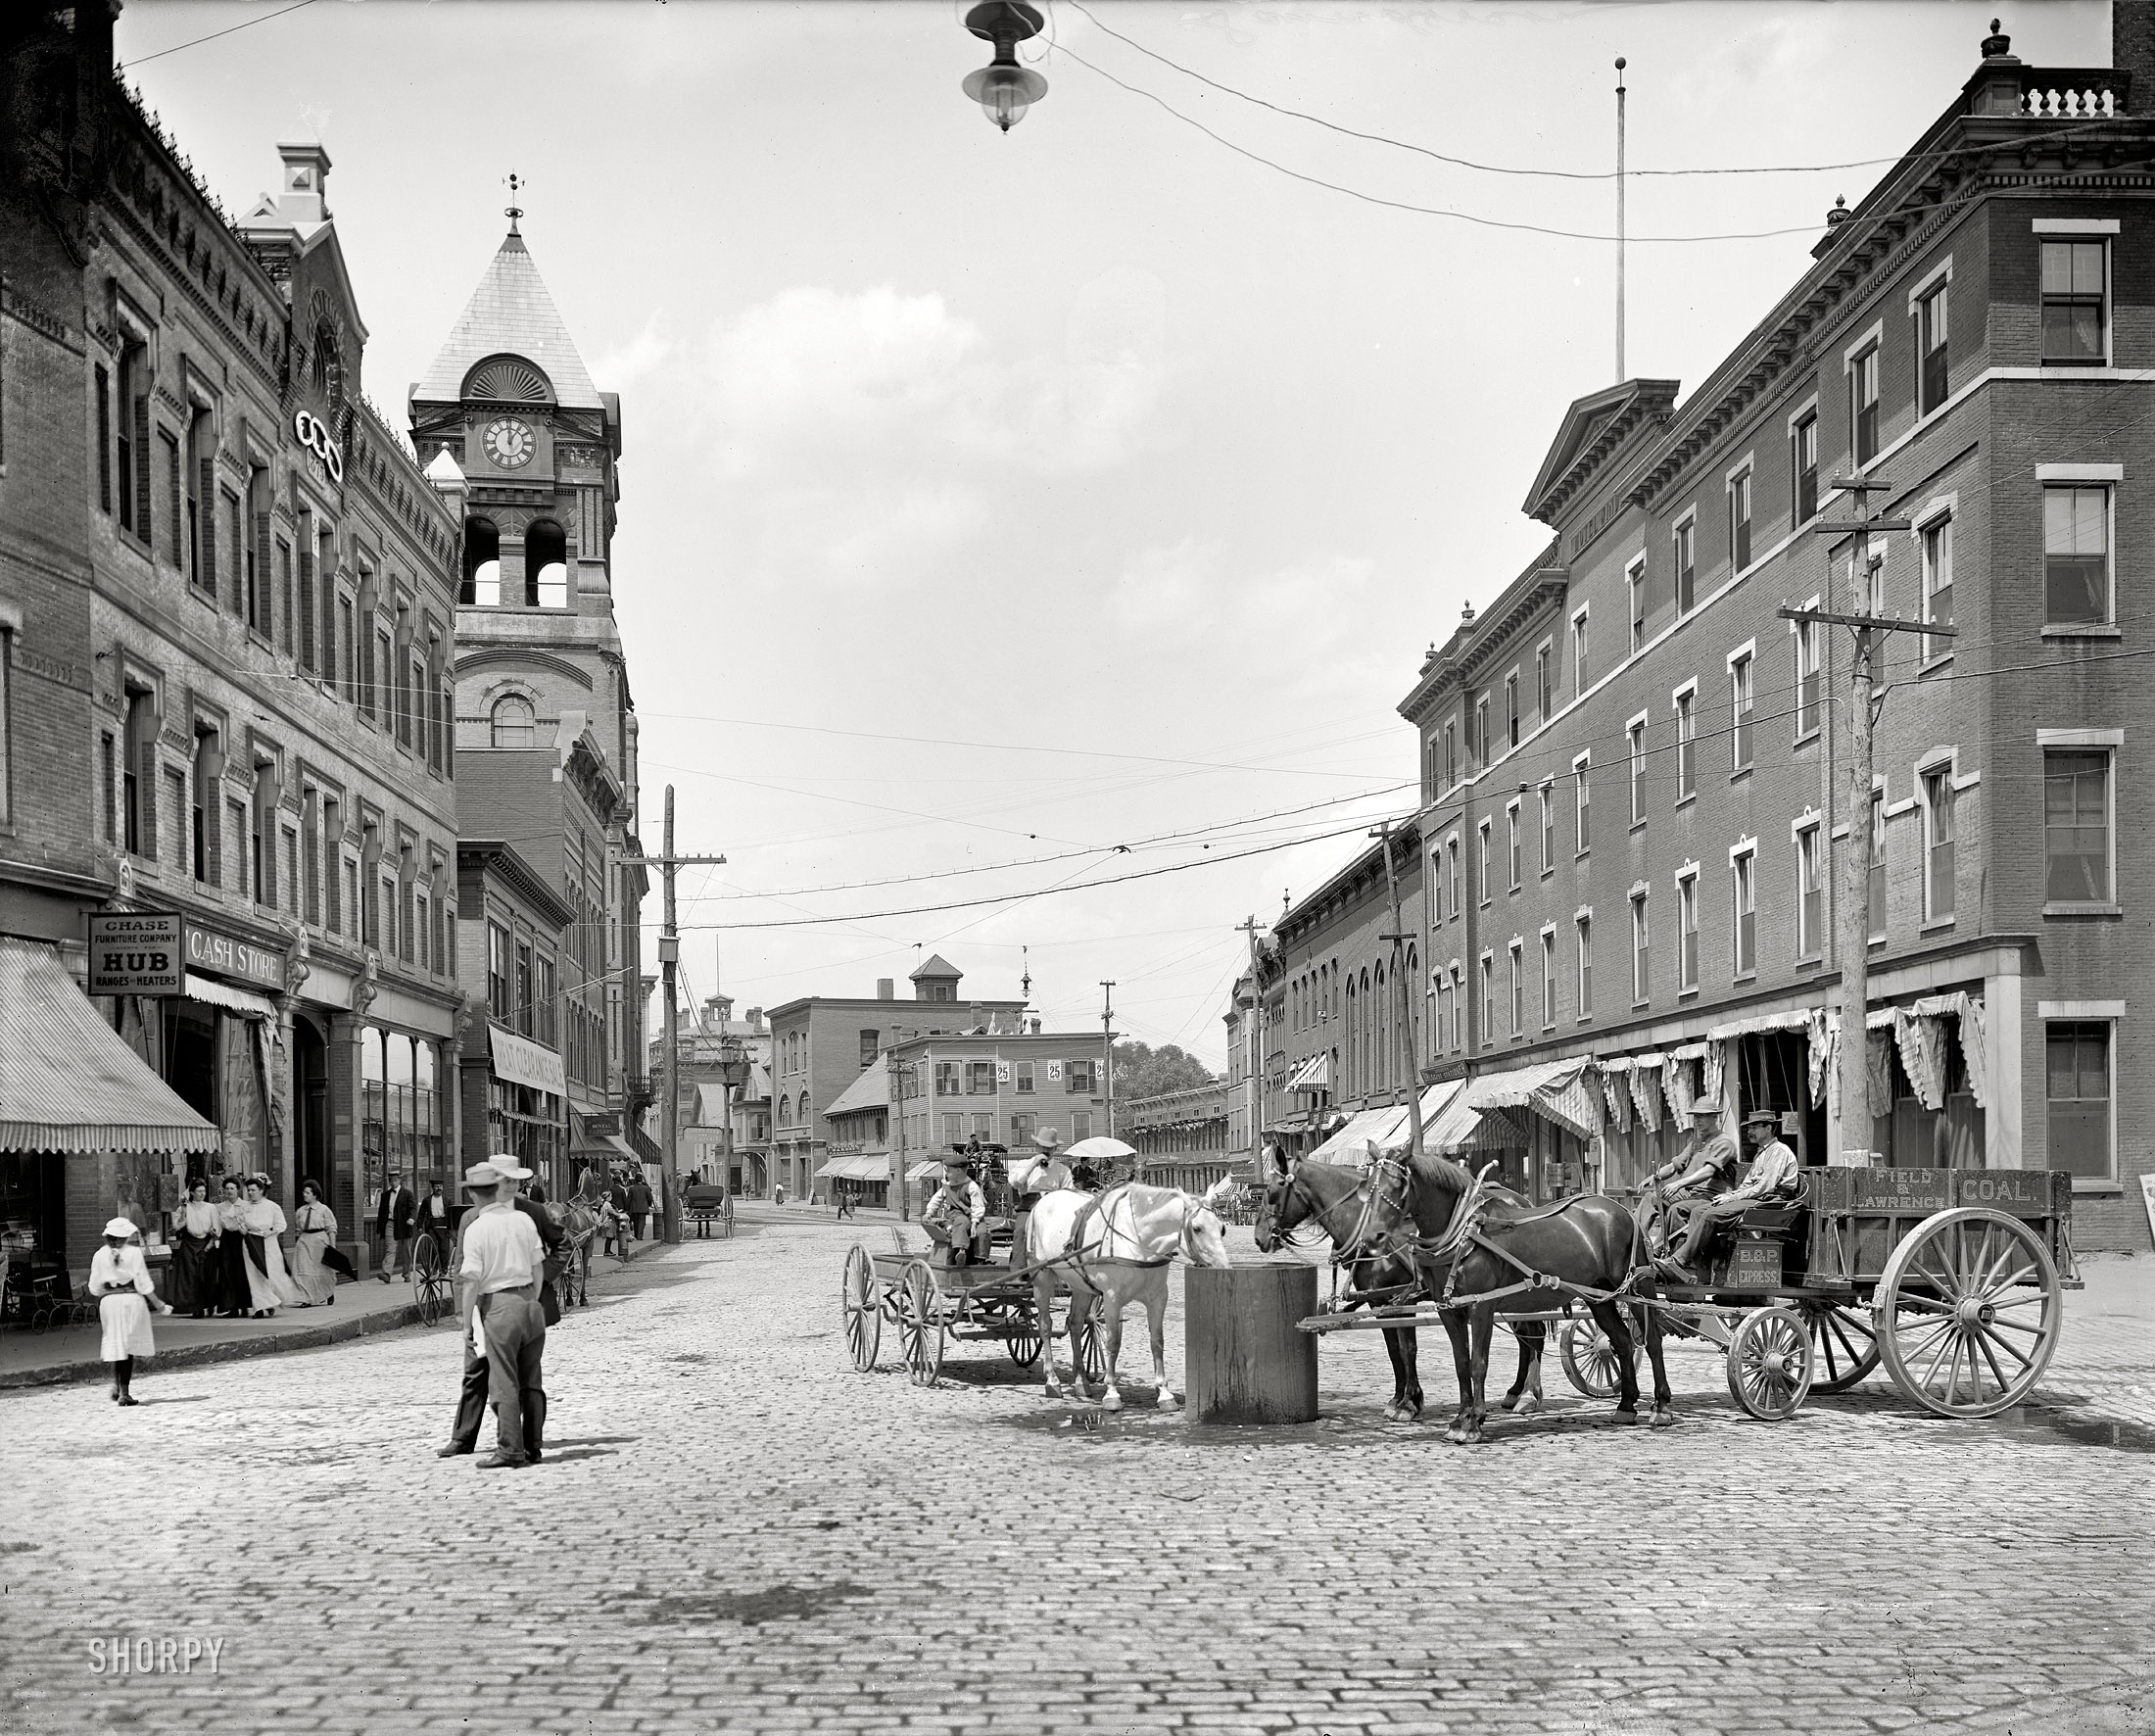 Bellows Falls, Vermont, circa 1907. "The Square." 8x10 inch dry plate glass negative, Detroit Publishing Company. View full size.